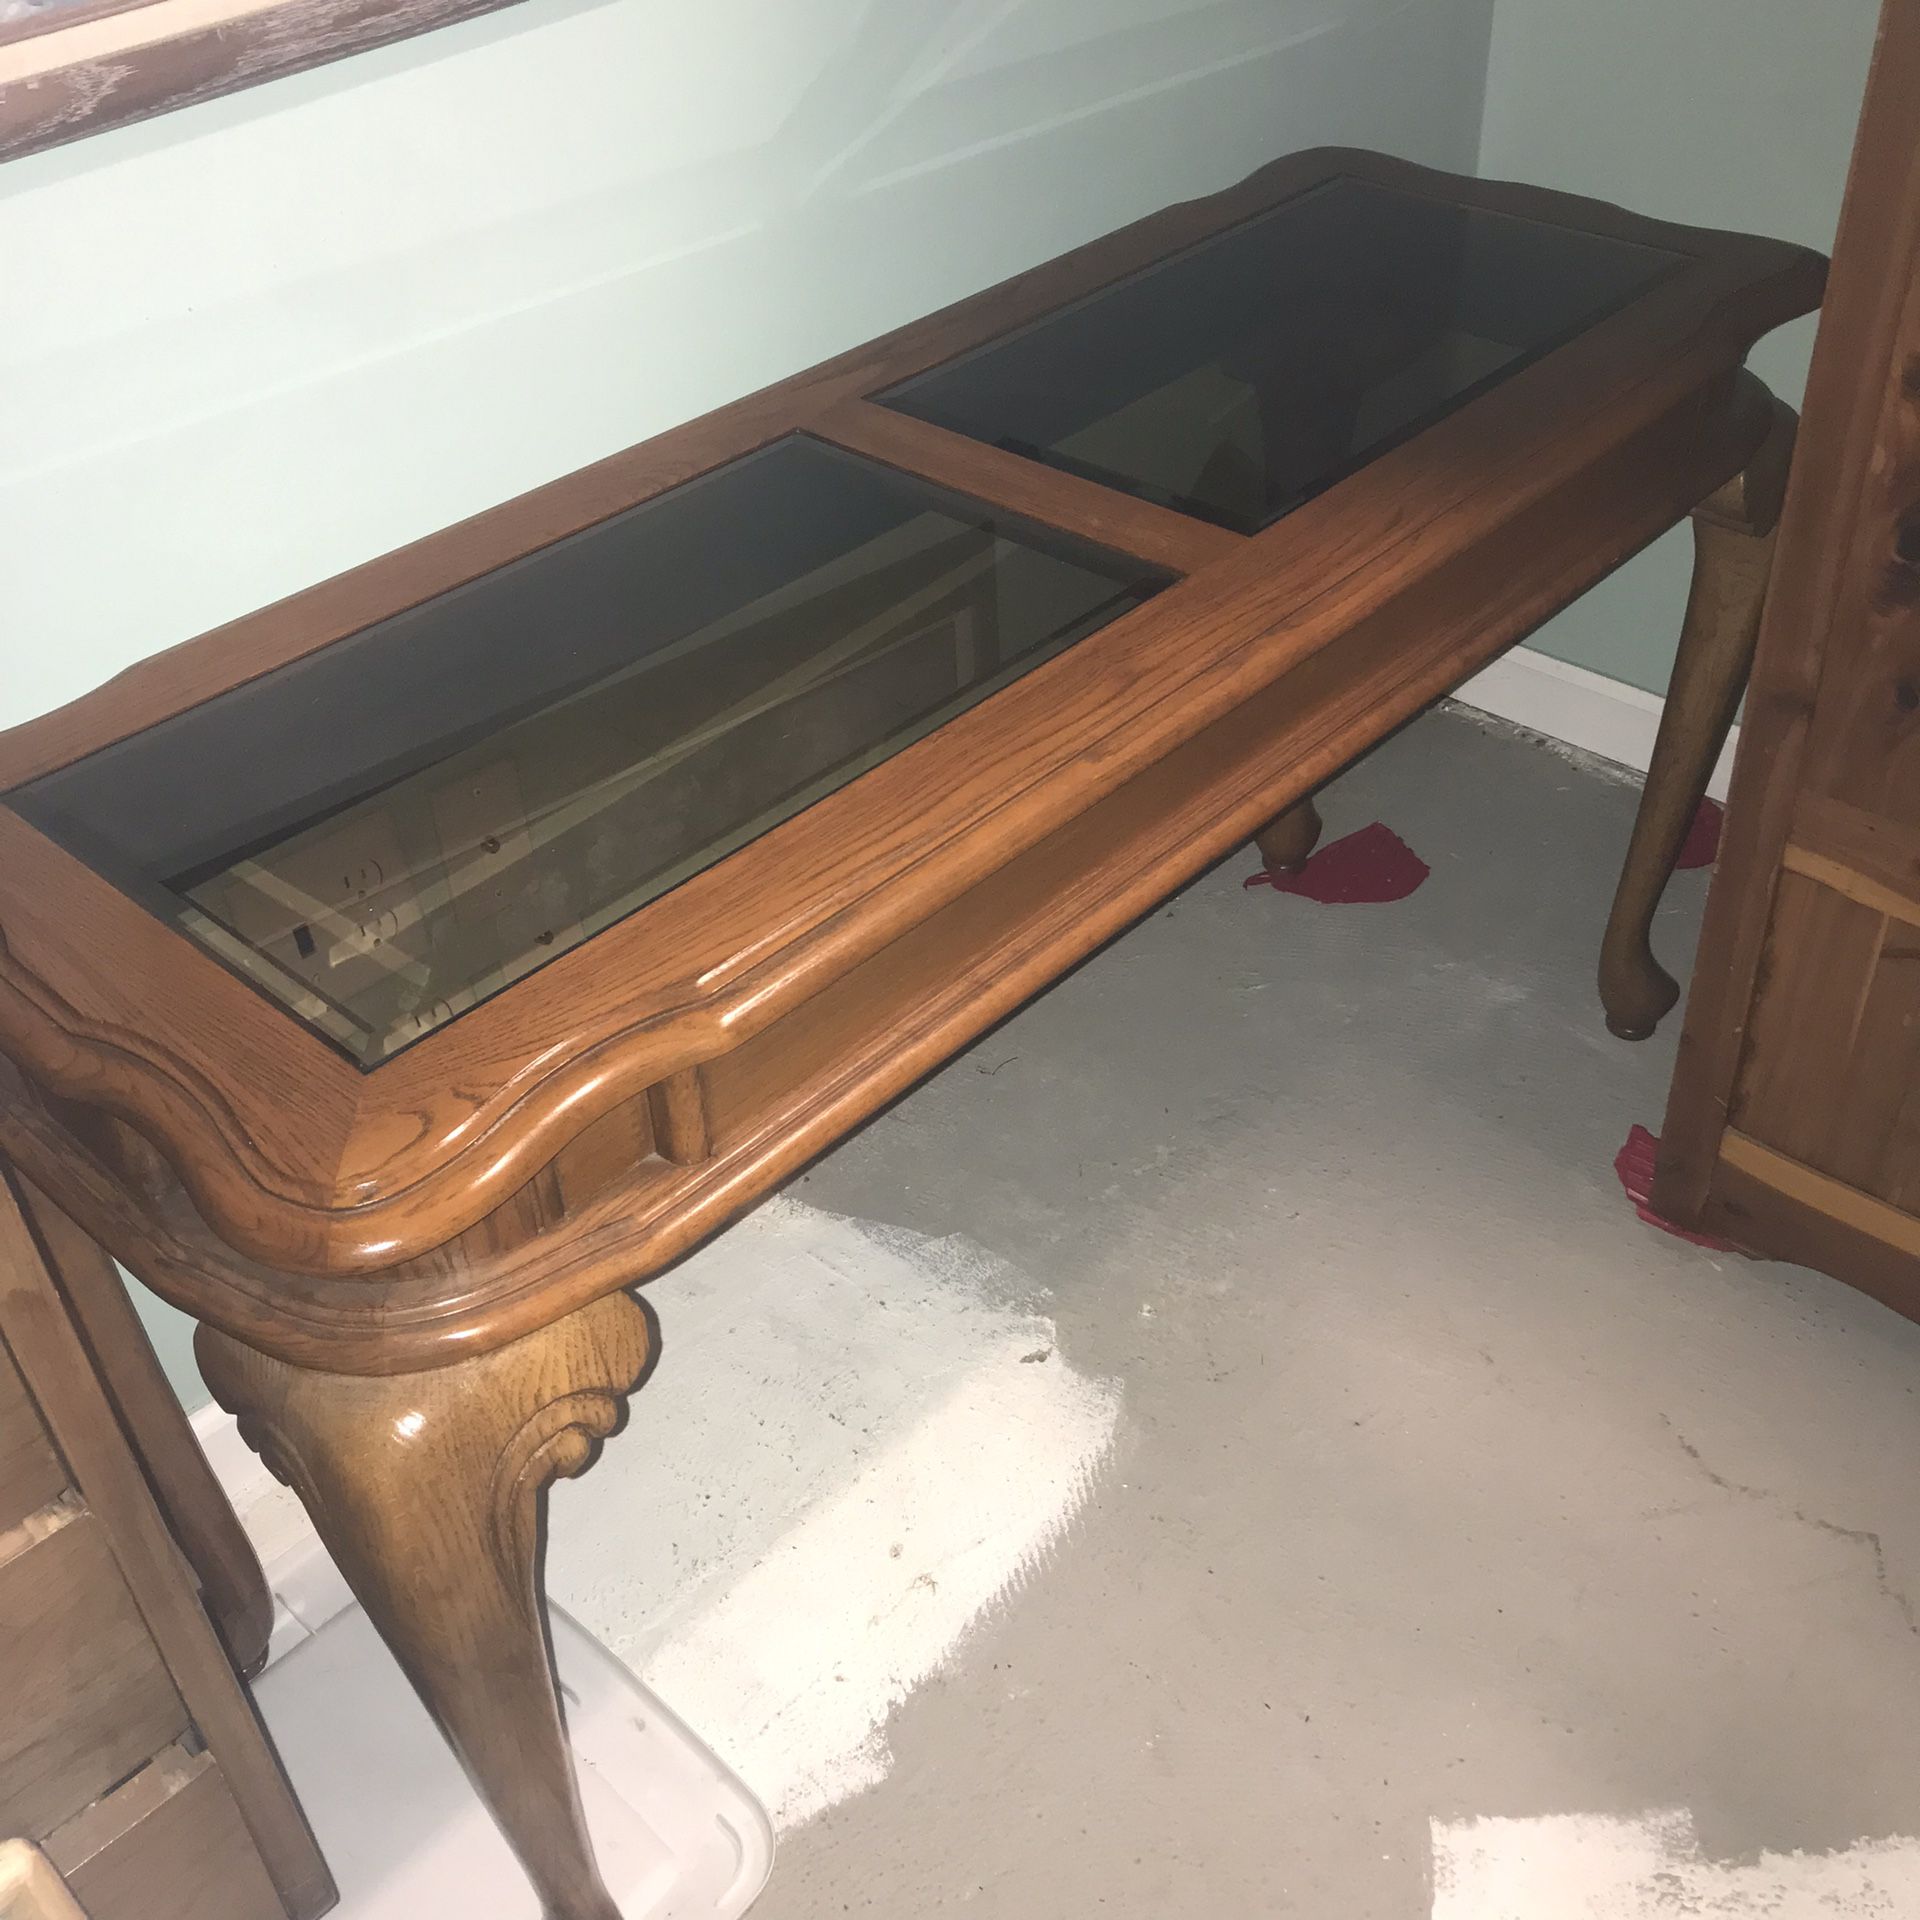 Sofa Table/Entryway Table Wood w/ Glass On Top